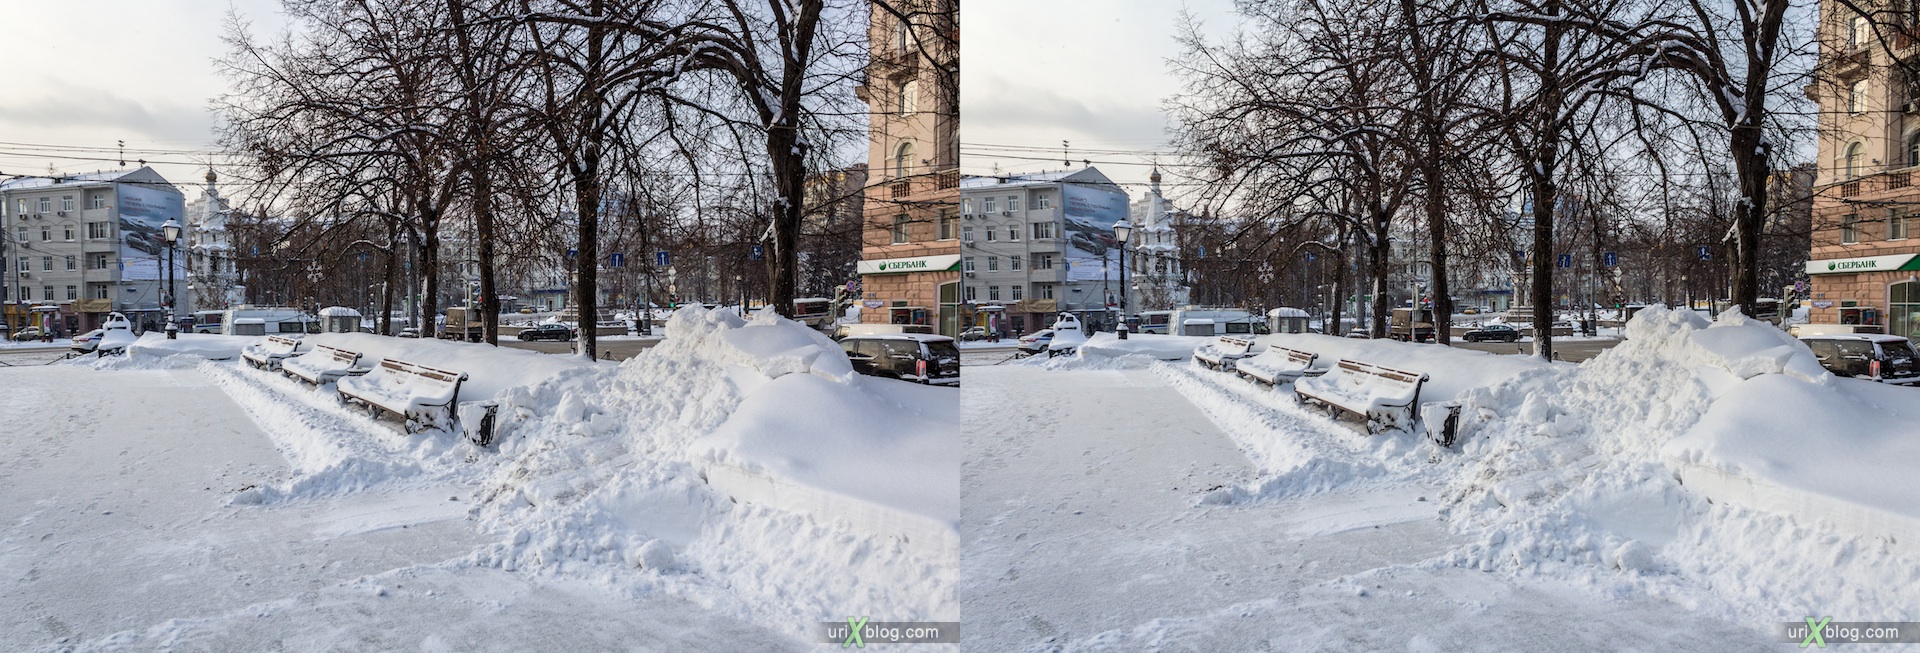 2013, Tverskoy Bulvar, Moscow, snow, winter, city, Russia, 3D, stereo pair, cross-eyed, crossview, cross view stereo pair